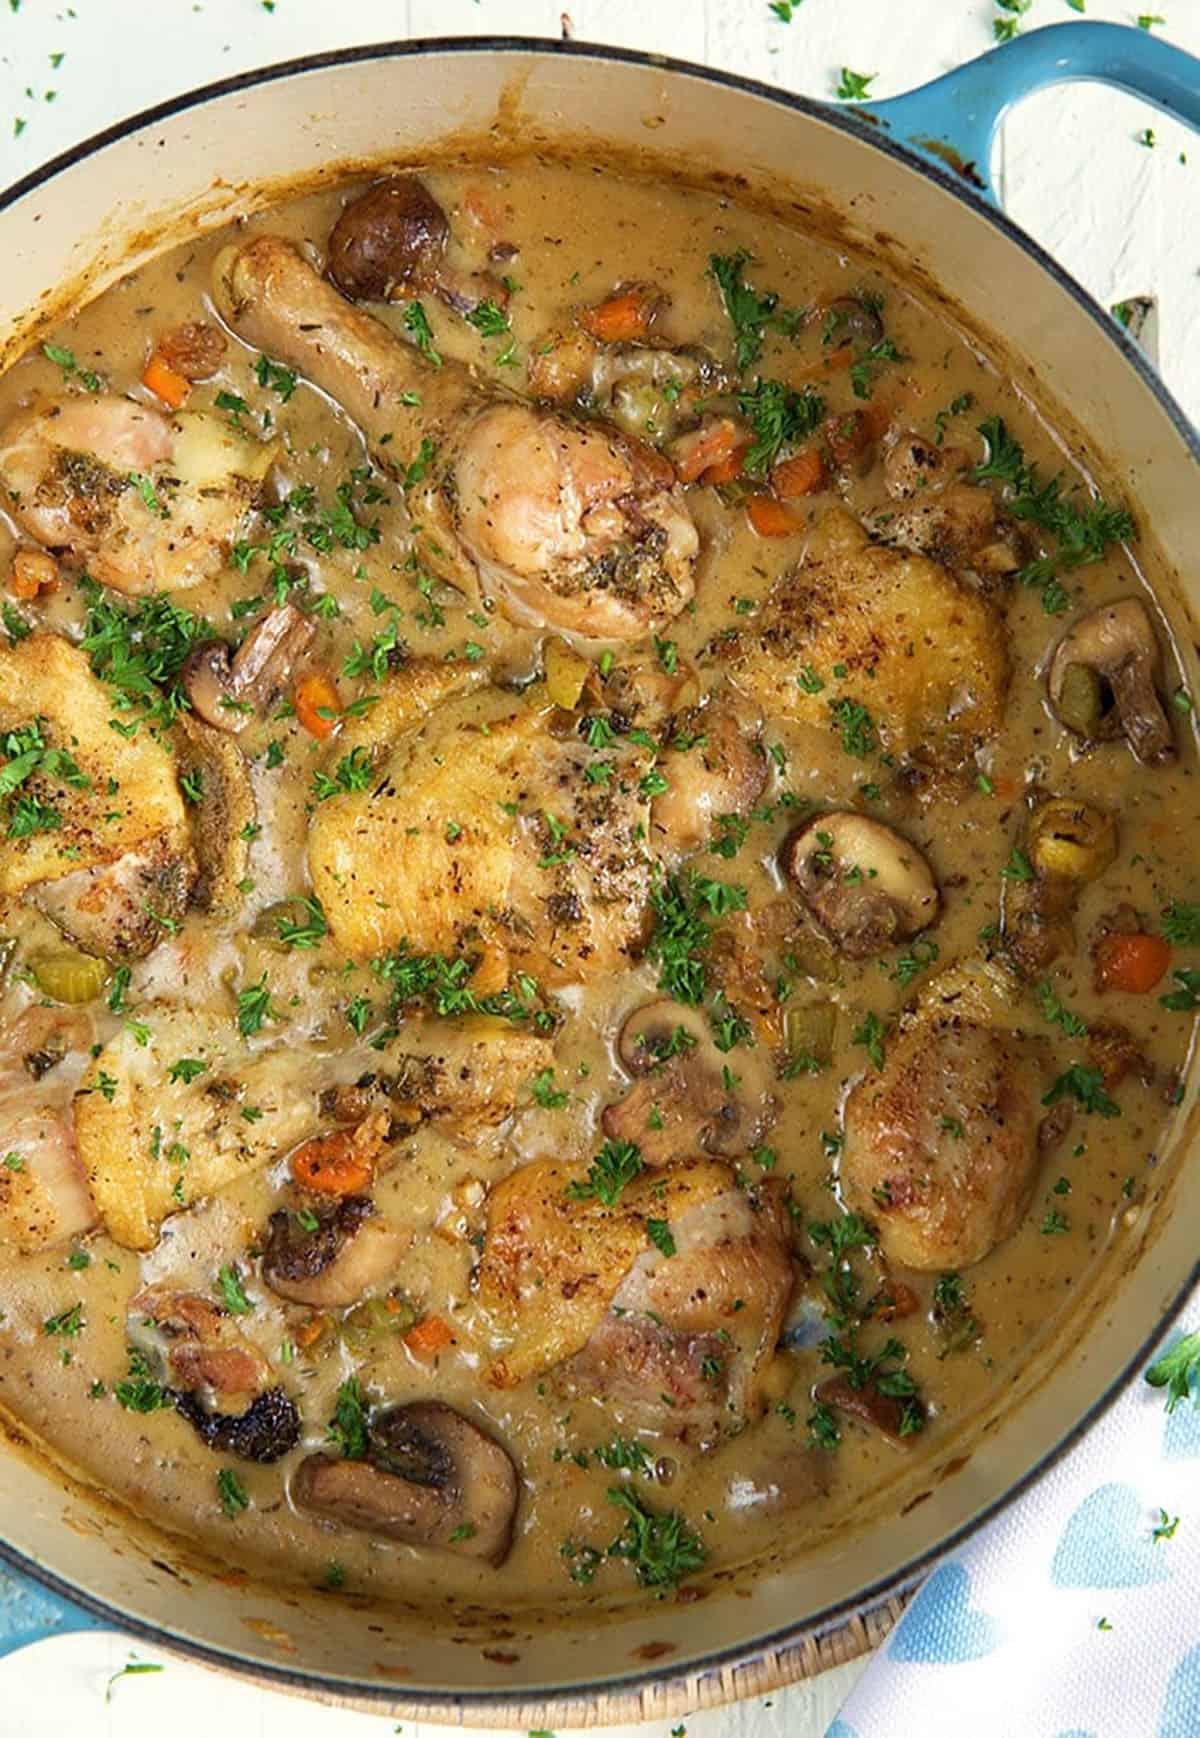 Chicken fricassee is in a large dutch oven.